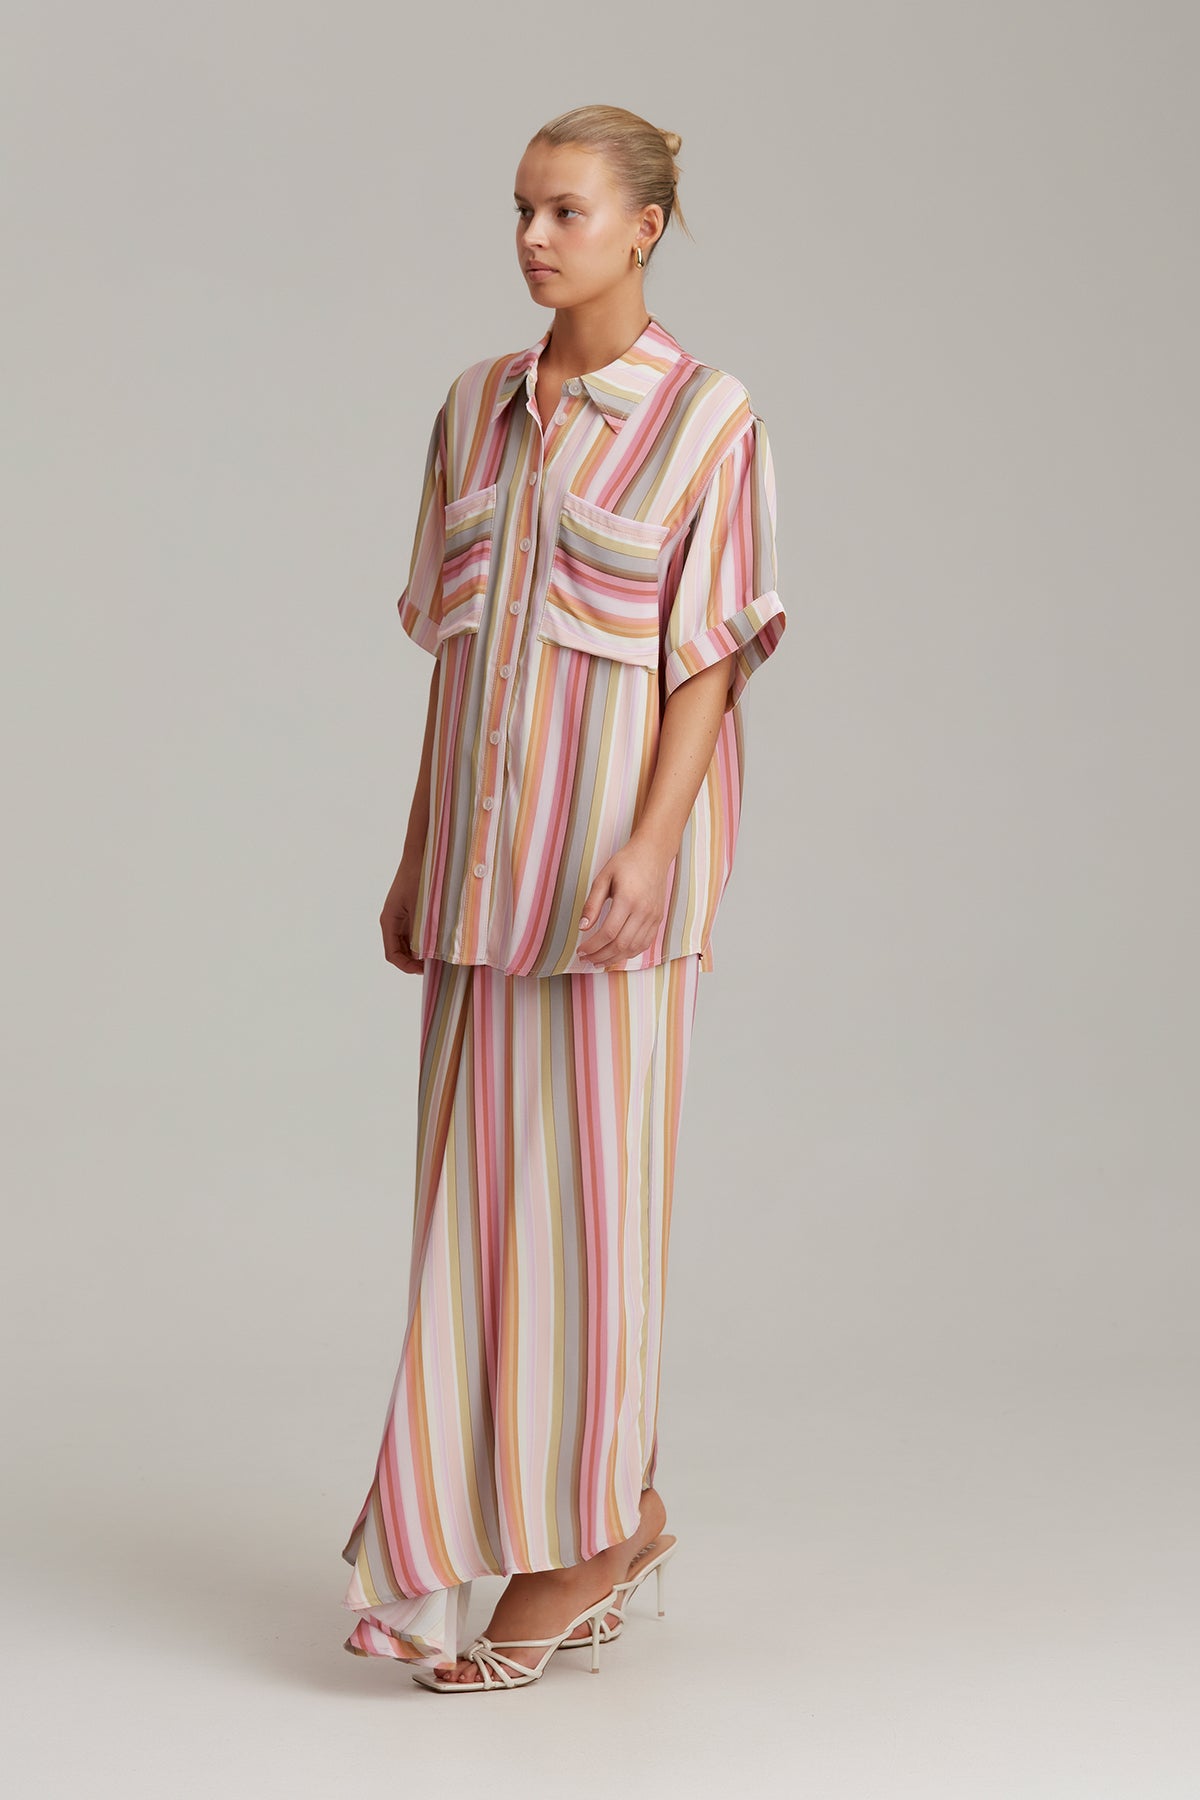 C/MEO Collective - Sincerely Skirt - Soft Stripe